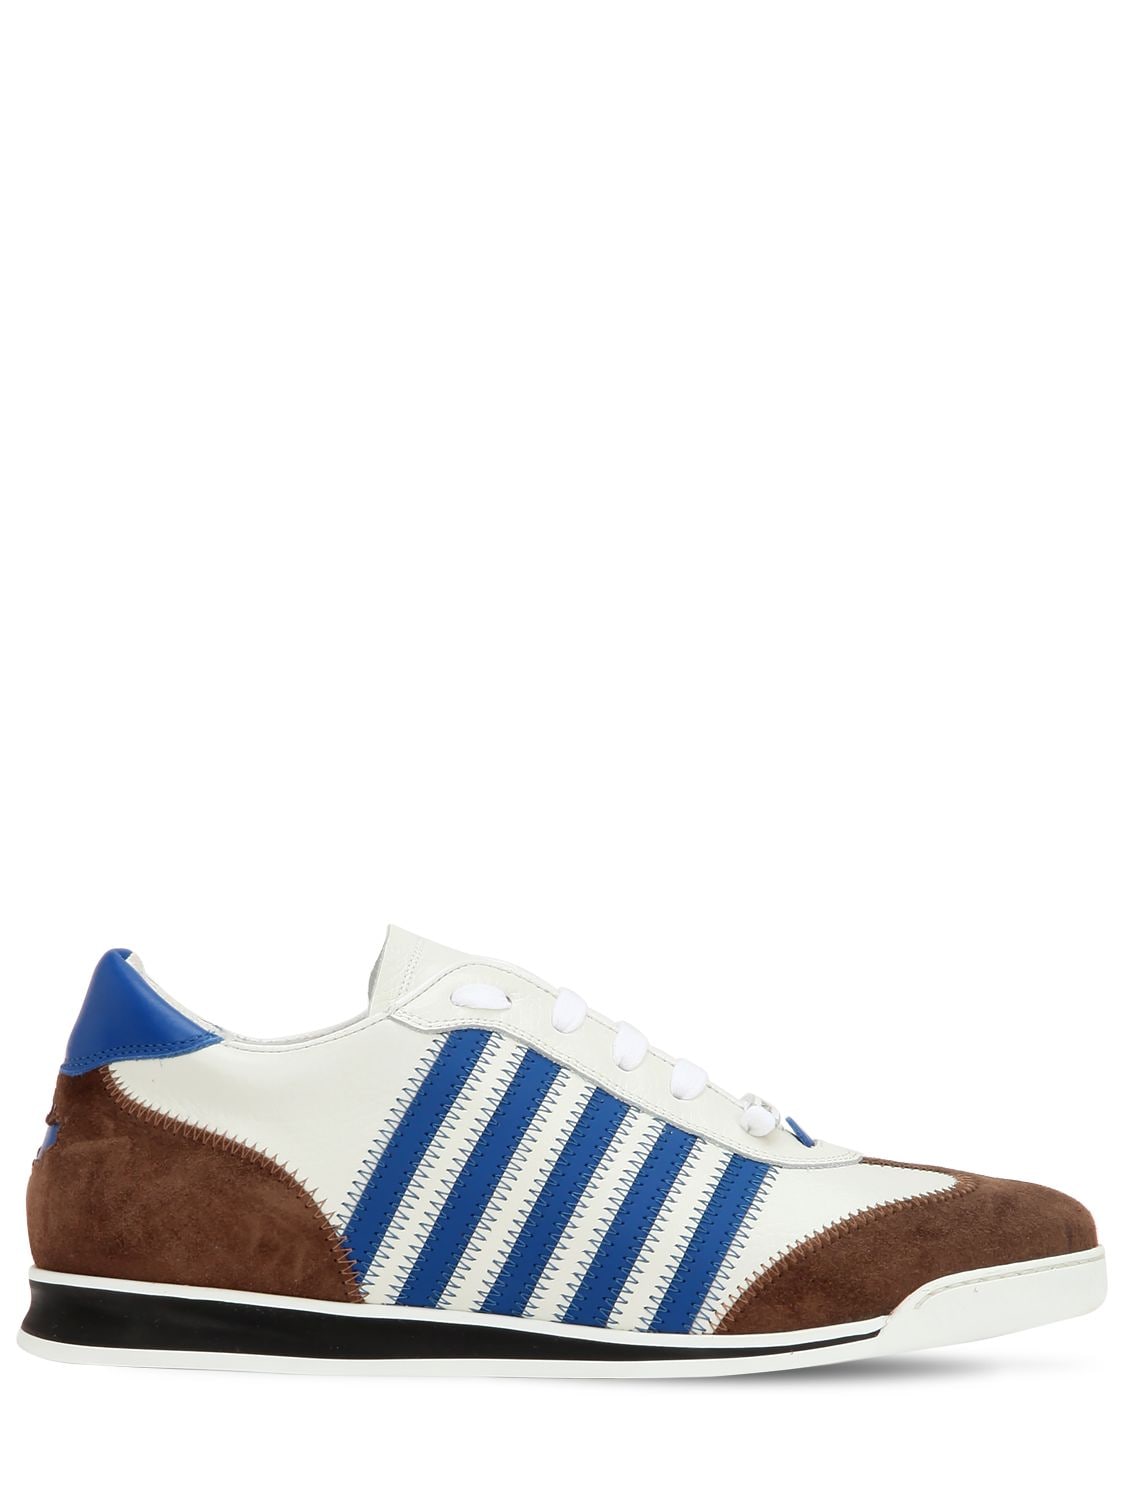 DSQUARED2 STRIPED LEATHER & SUEDE SNEAKERS,68IGH4013-TTEZNJK1